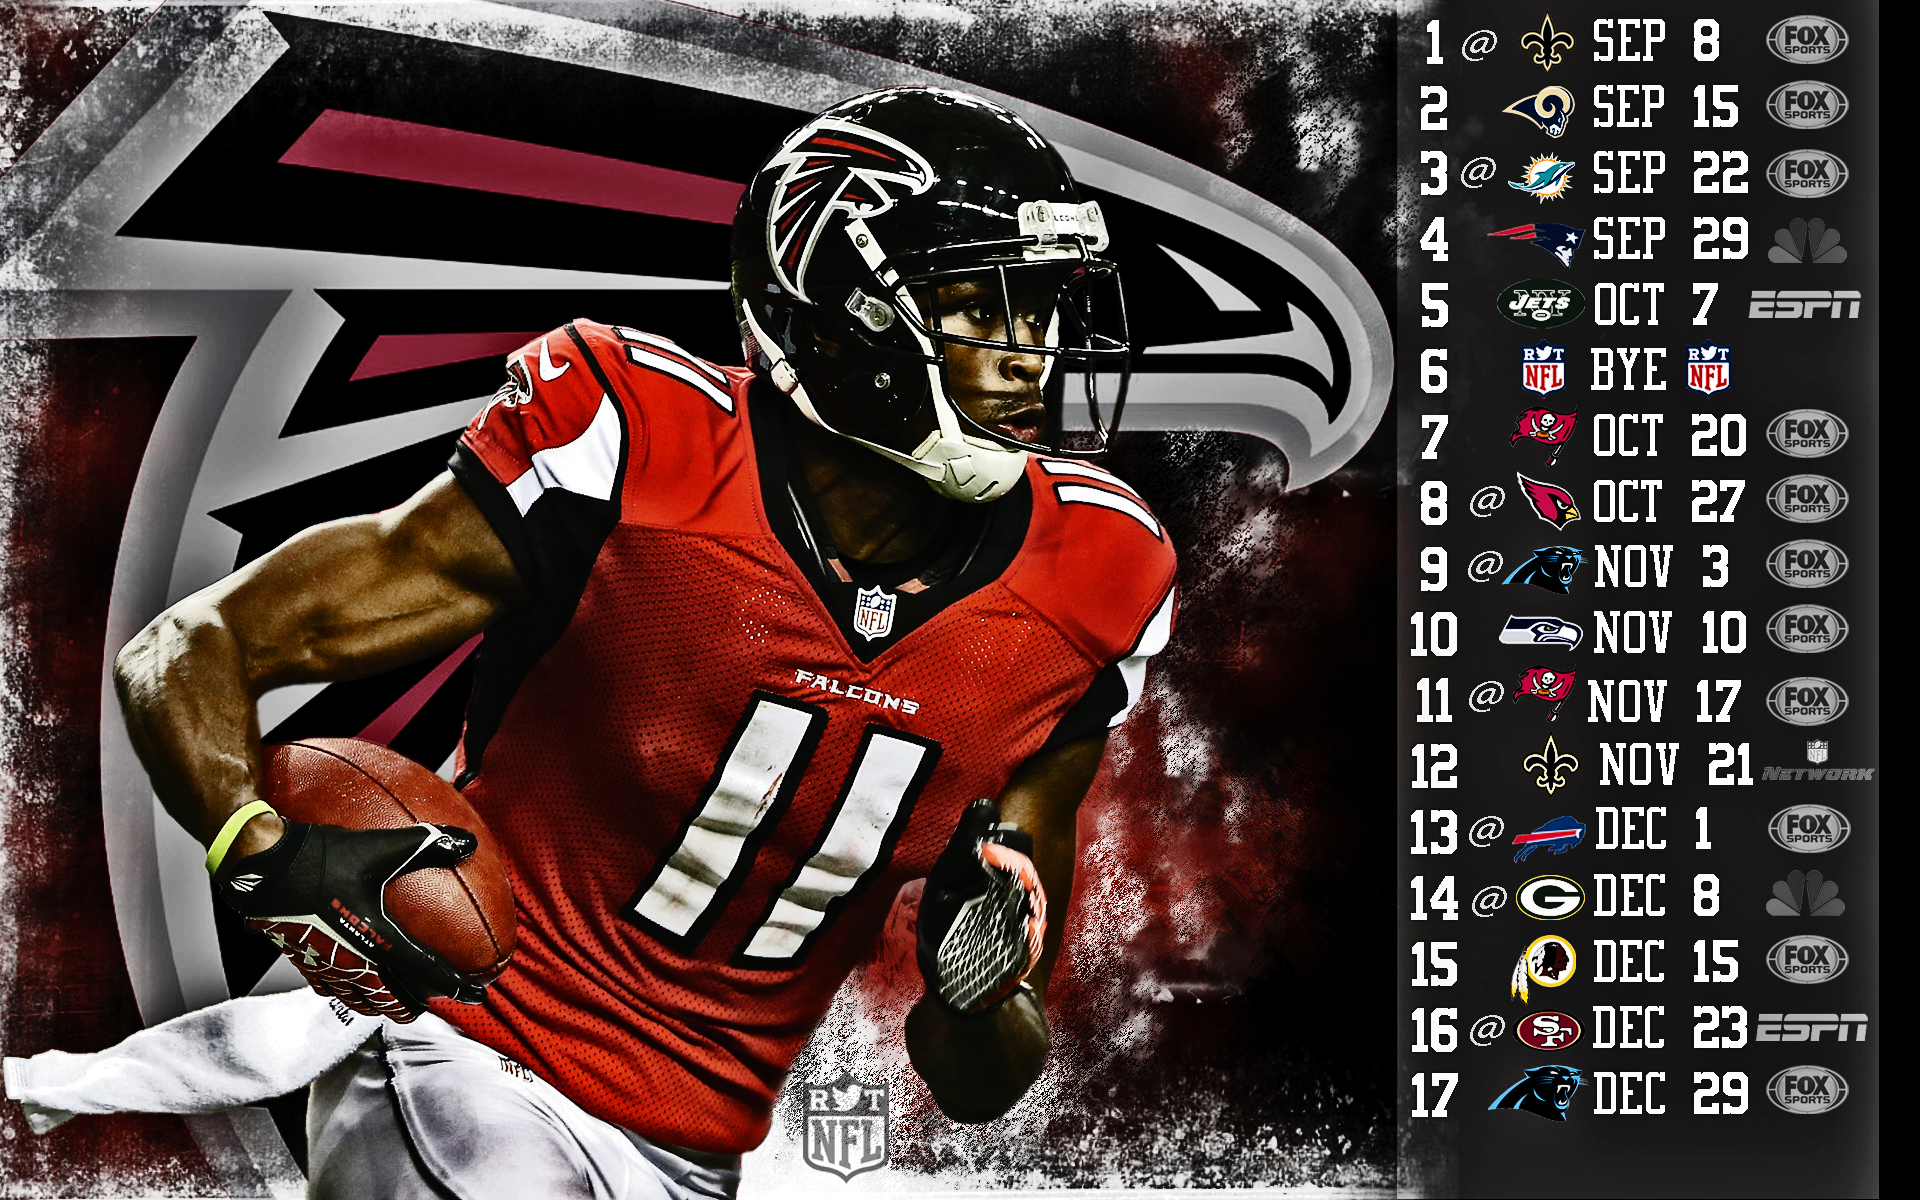 Nfl Schedule Wallpaper HDr Sports